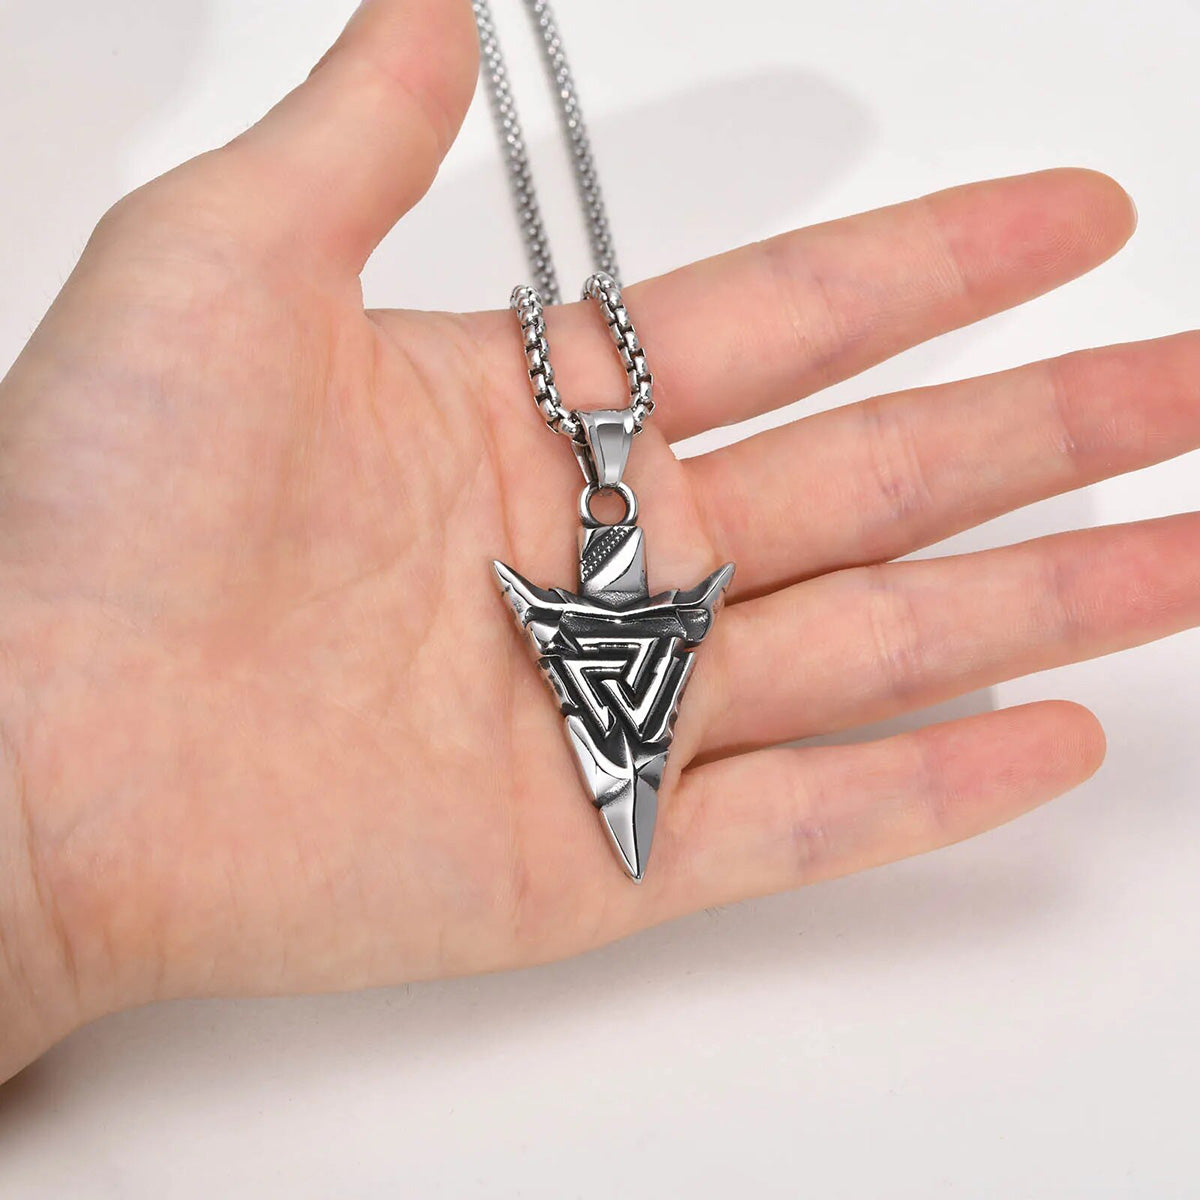 Viking - Cool Nordic Vikings Necklaces for Men, Waterproof Stainless Steel Retro Triangle Pendant Collar, Amulet Talisman Jewelry